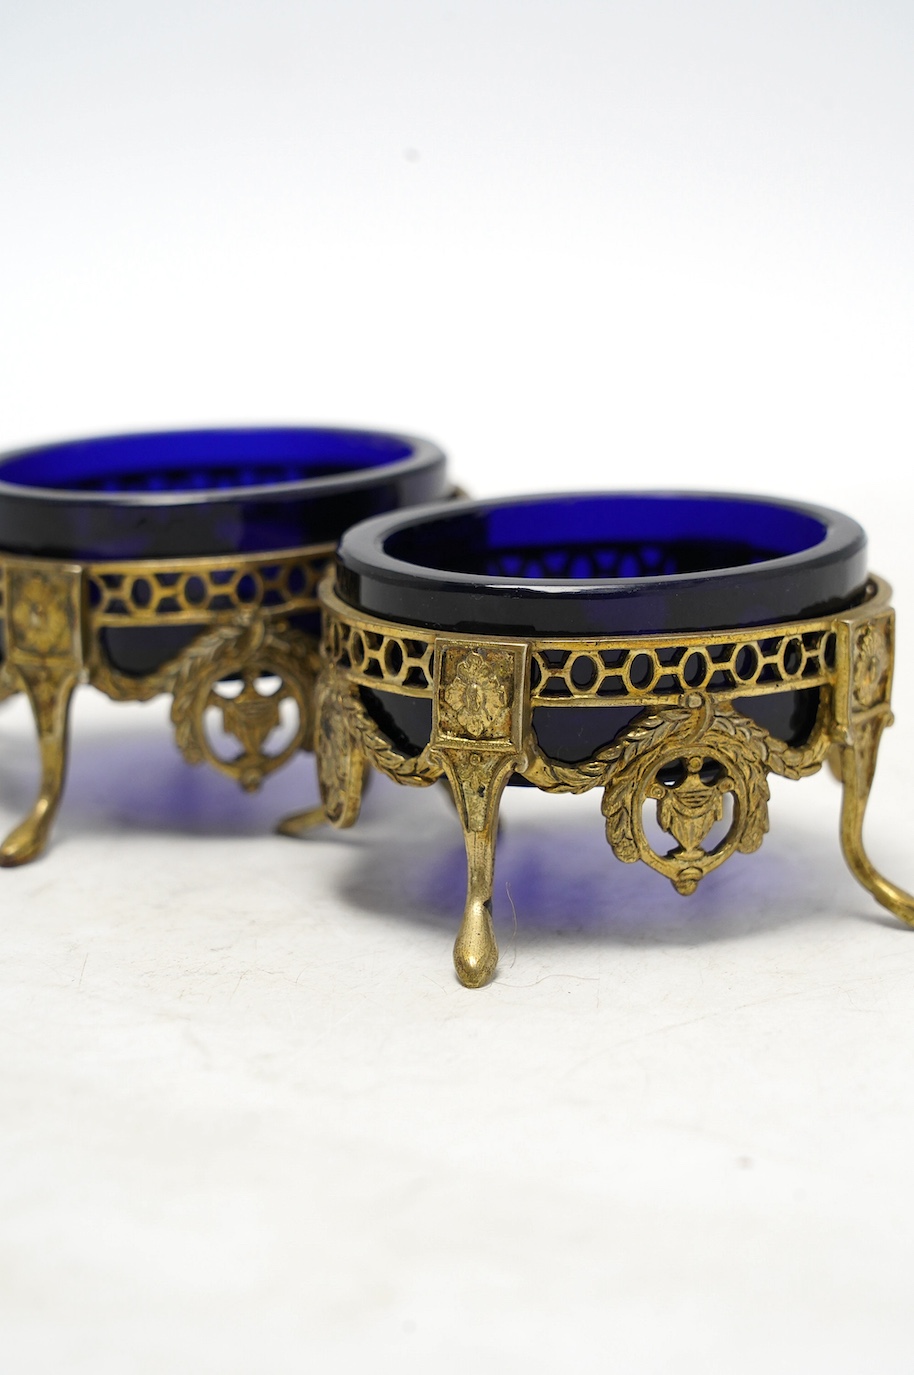 A pair of late 19th/early 20th century continental pierced gilt white metal oval salts, with blue glass liners, 69mm. Condition - fair